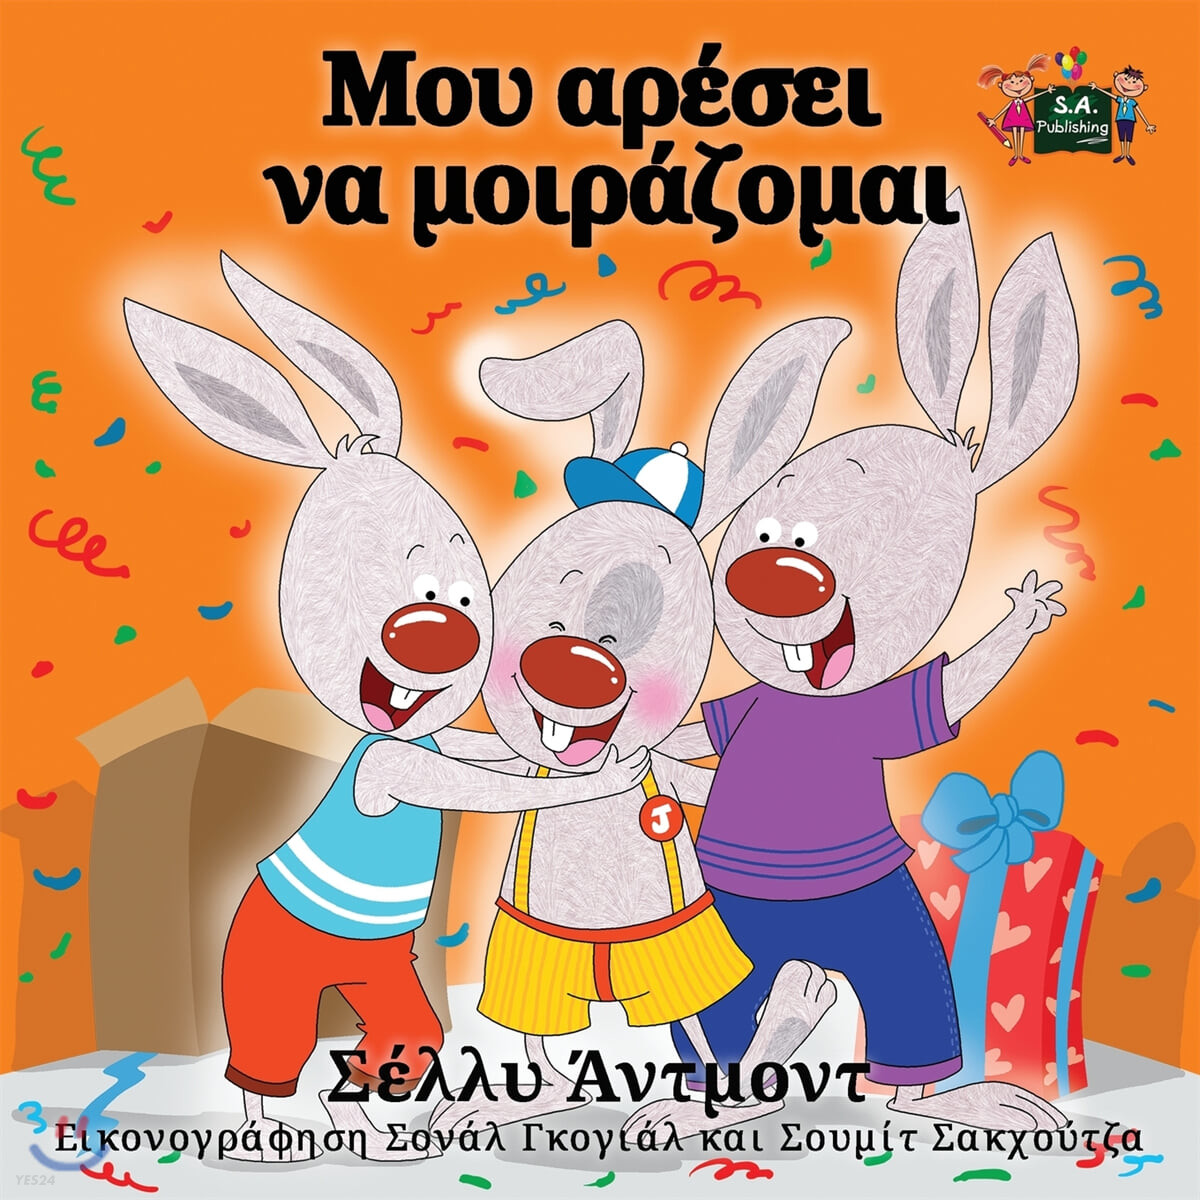 I Love to Share (Greek Edition)